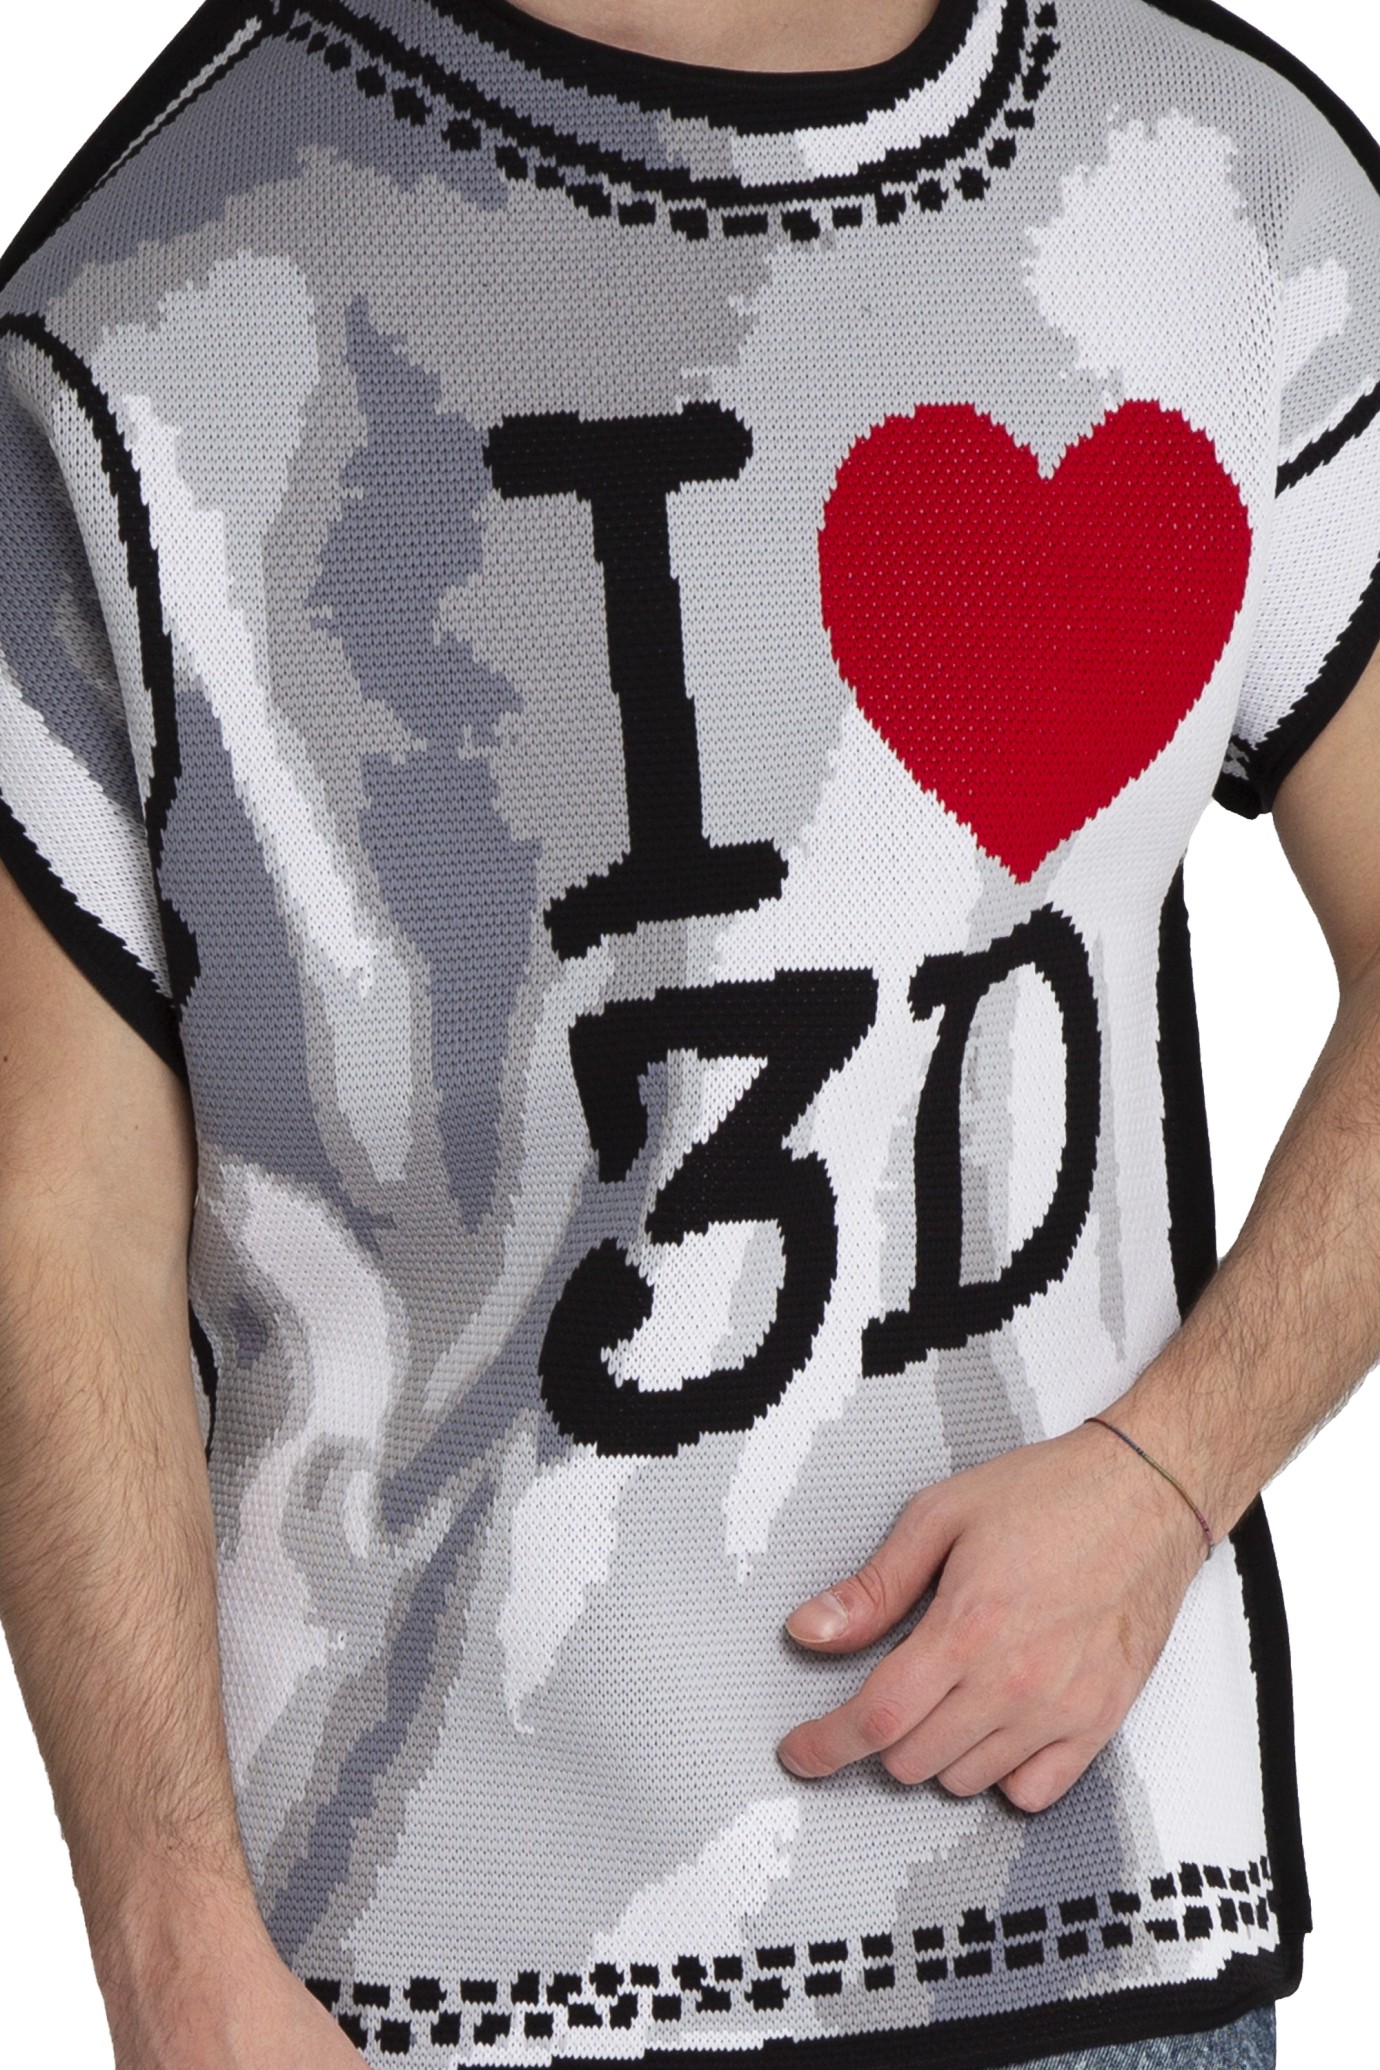 Two Dimensional 3D Knitted Tee